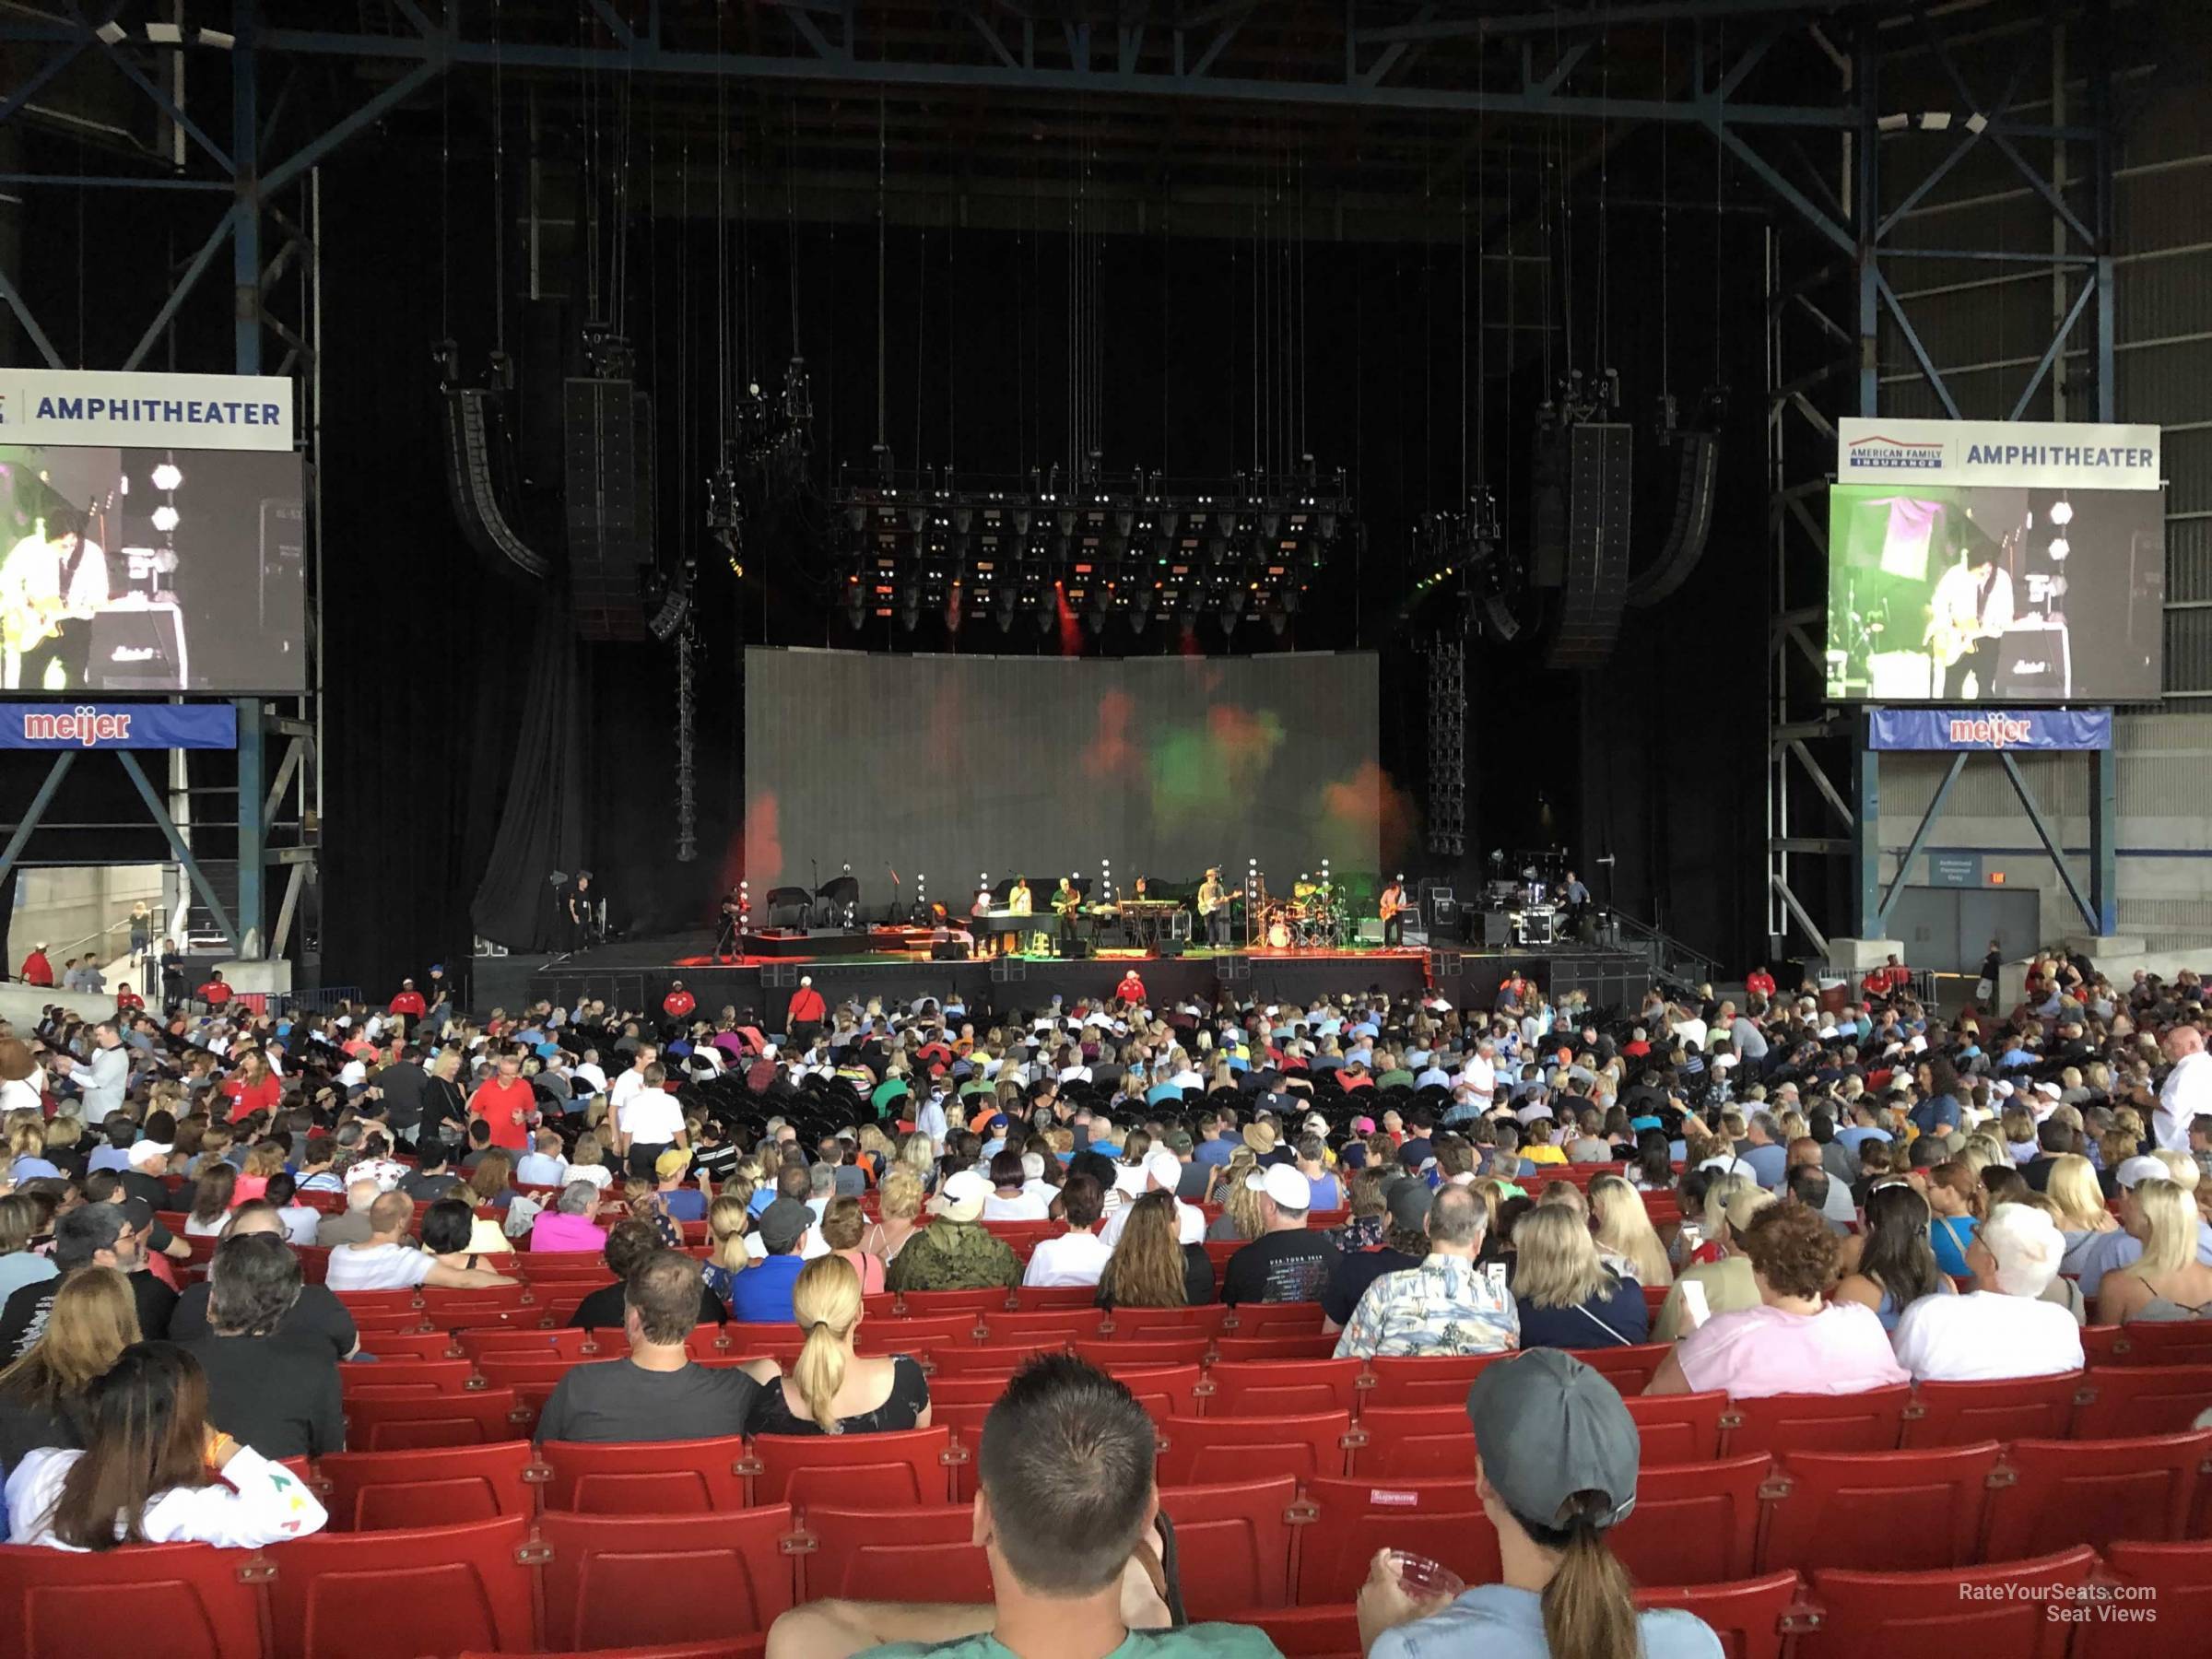 section 103, row ww seat view  - american family insurance amphitheater